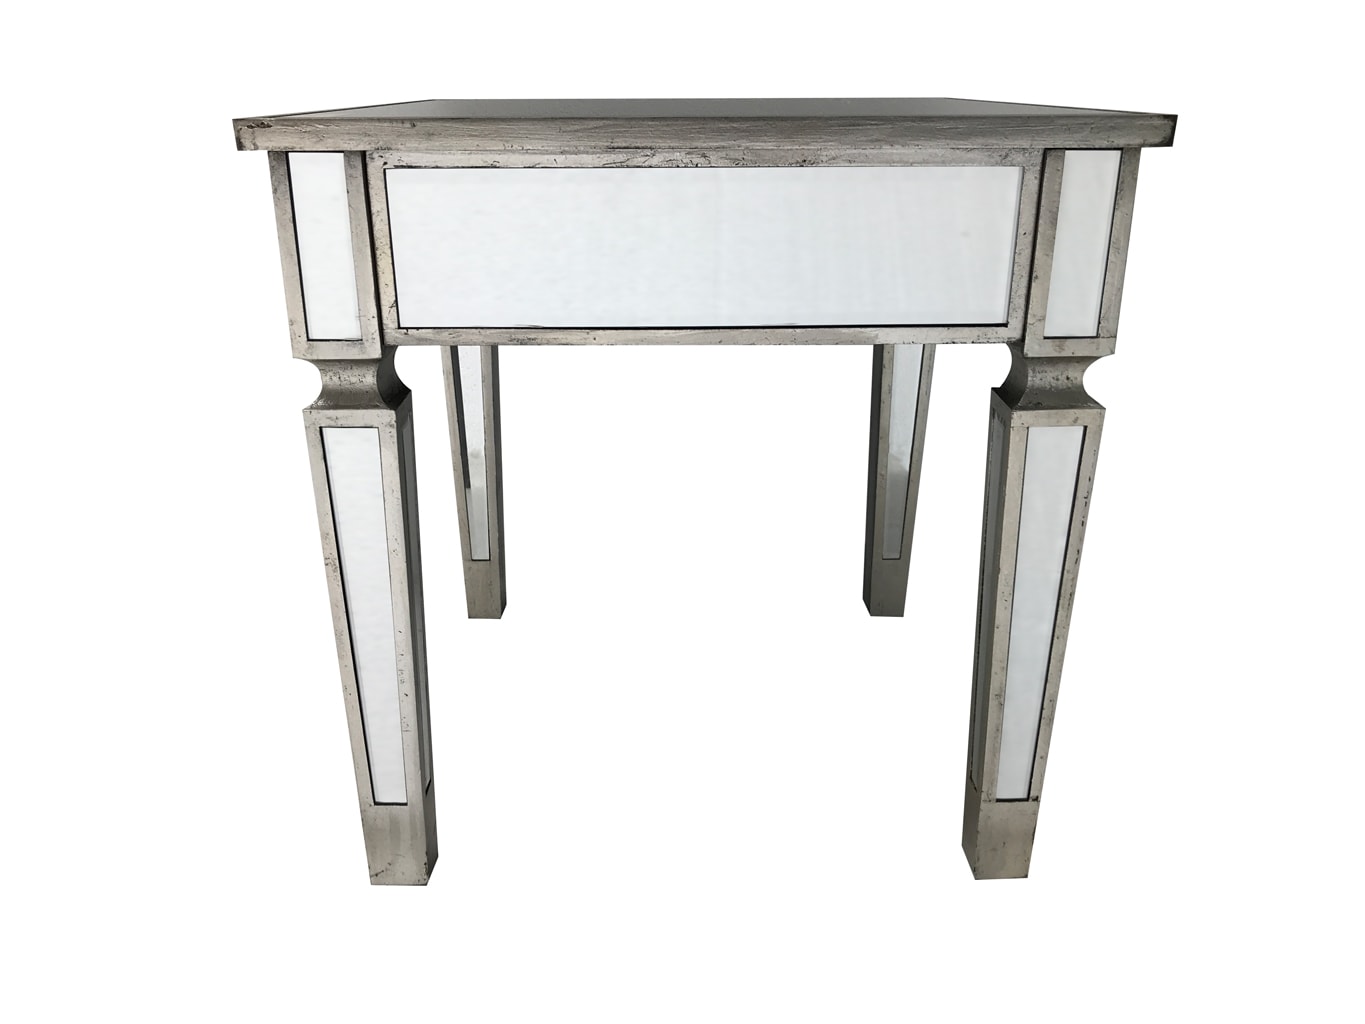 Mirrored Side Table With Vintage Wooden Edge And Mirror Top Charleston